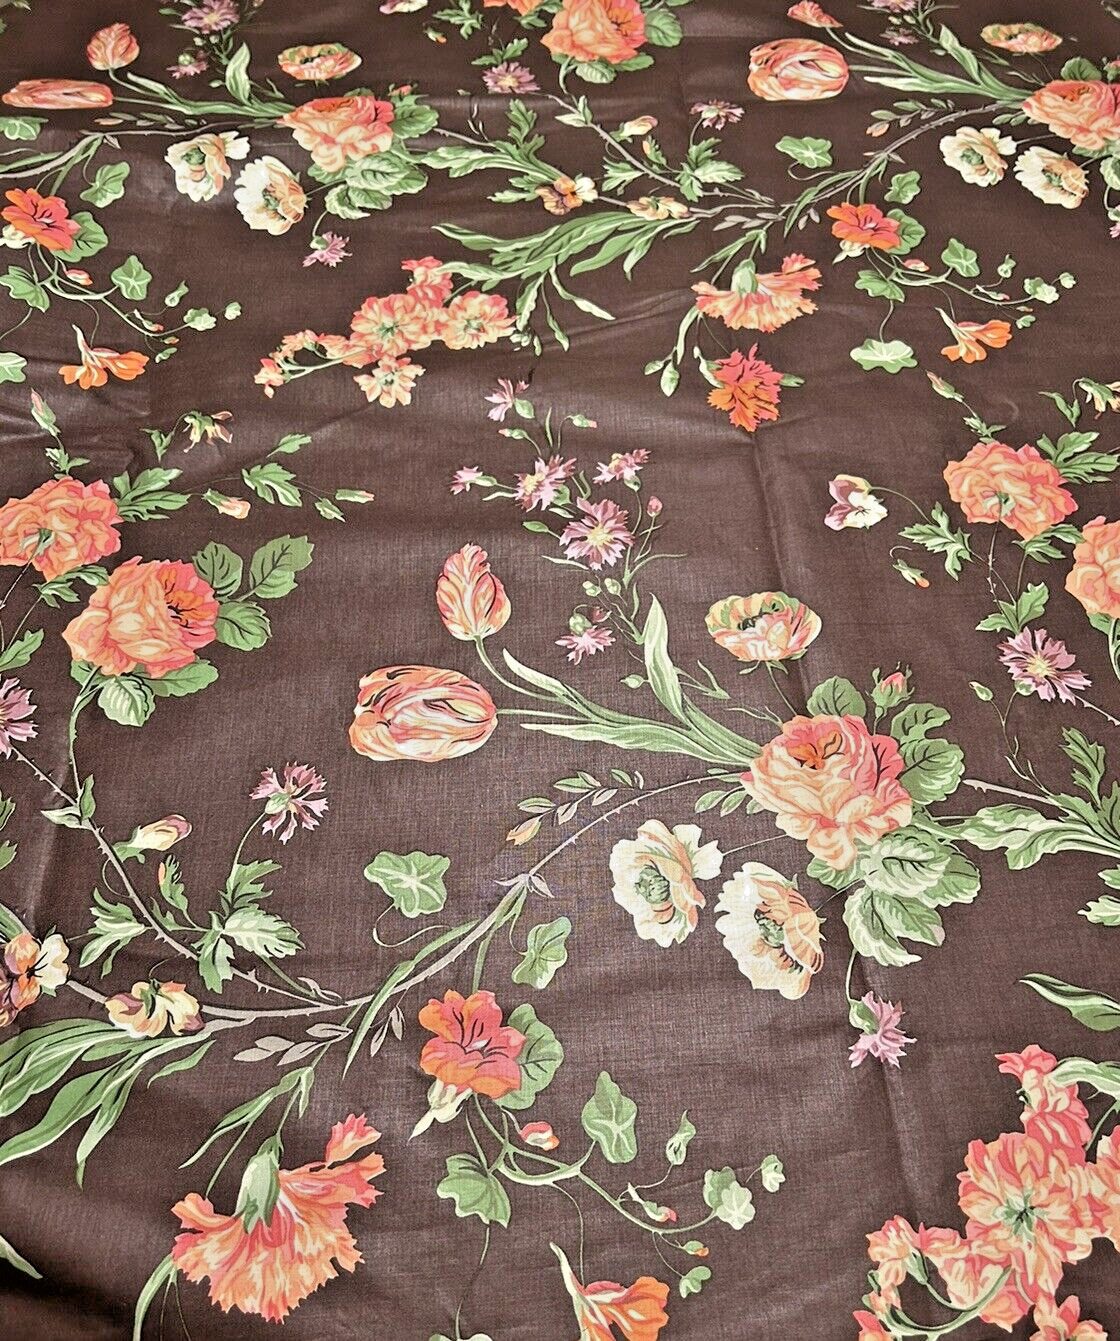 Brunschwig & Fils Jardiniere Fabric 1980 Brown Large Scale Floral 12 Yards